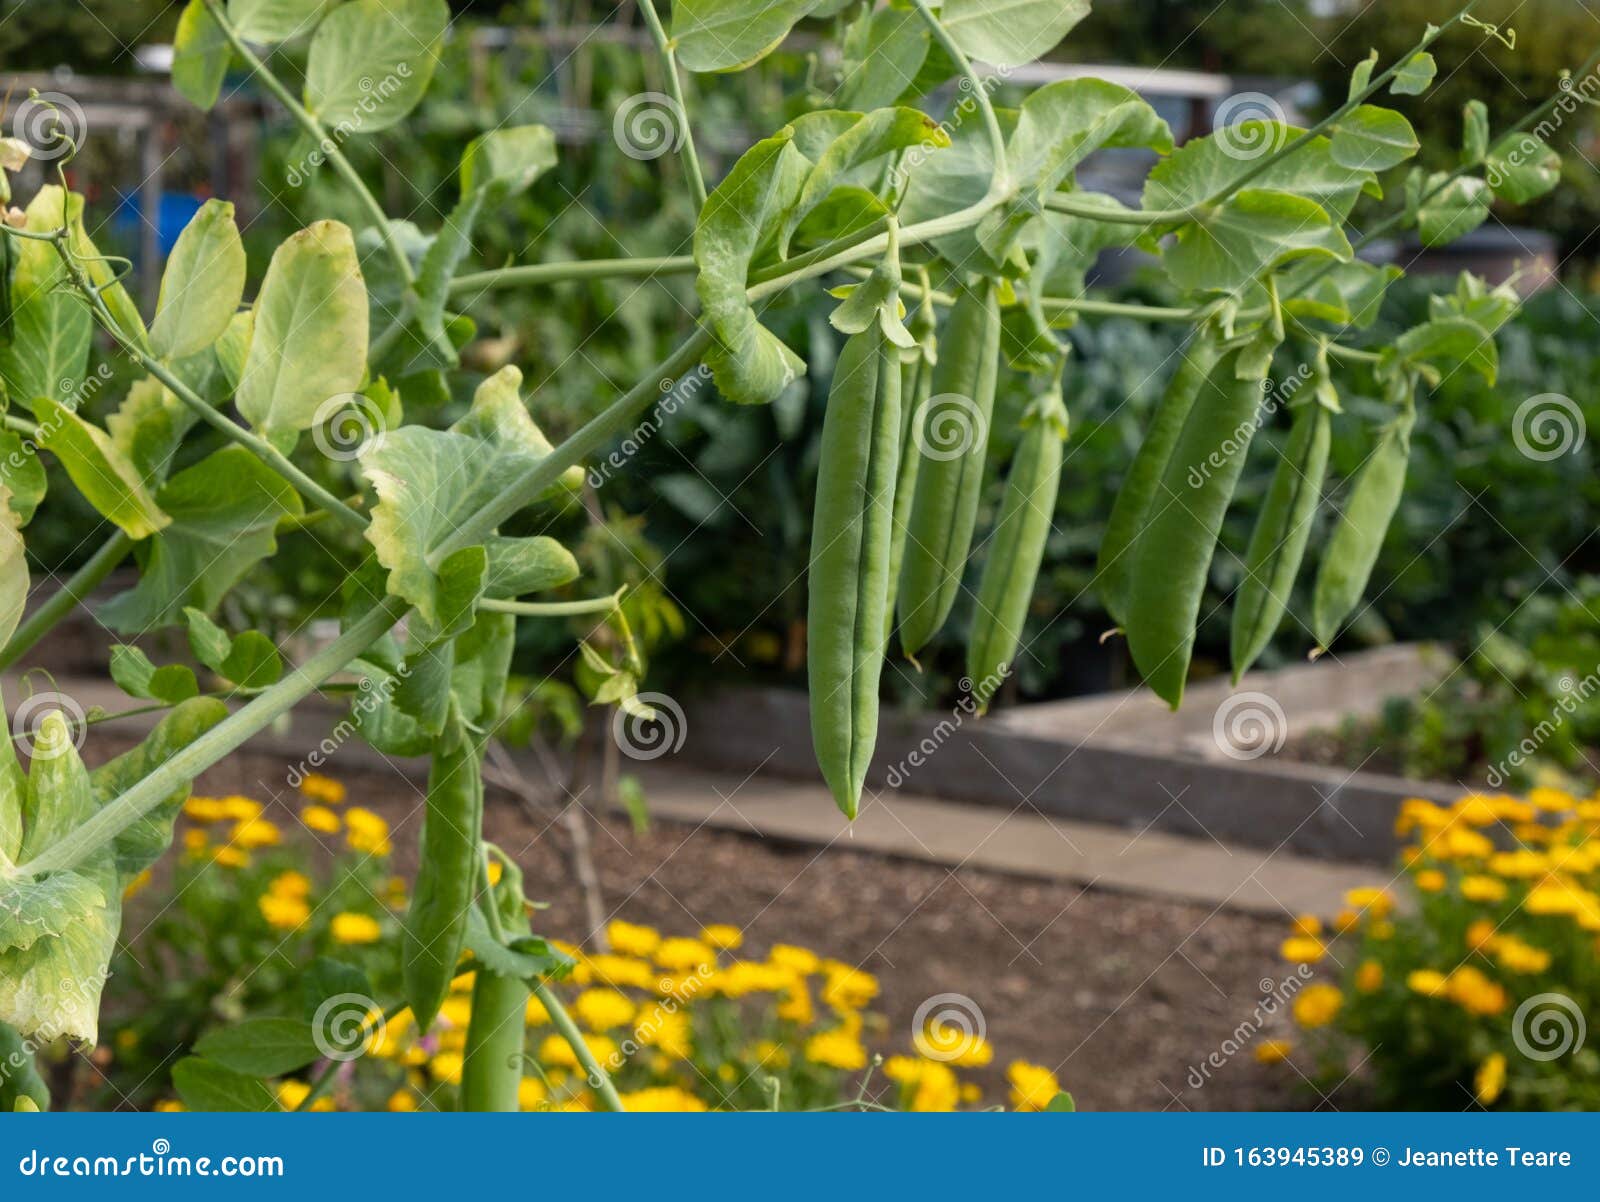 pea pods growing in vegetable garden,  growing on well-kept allotment